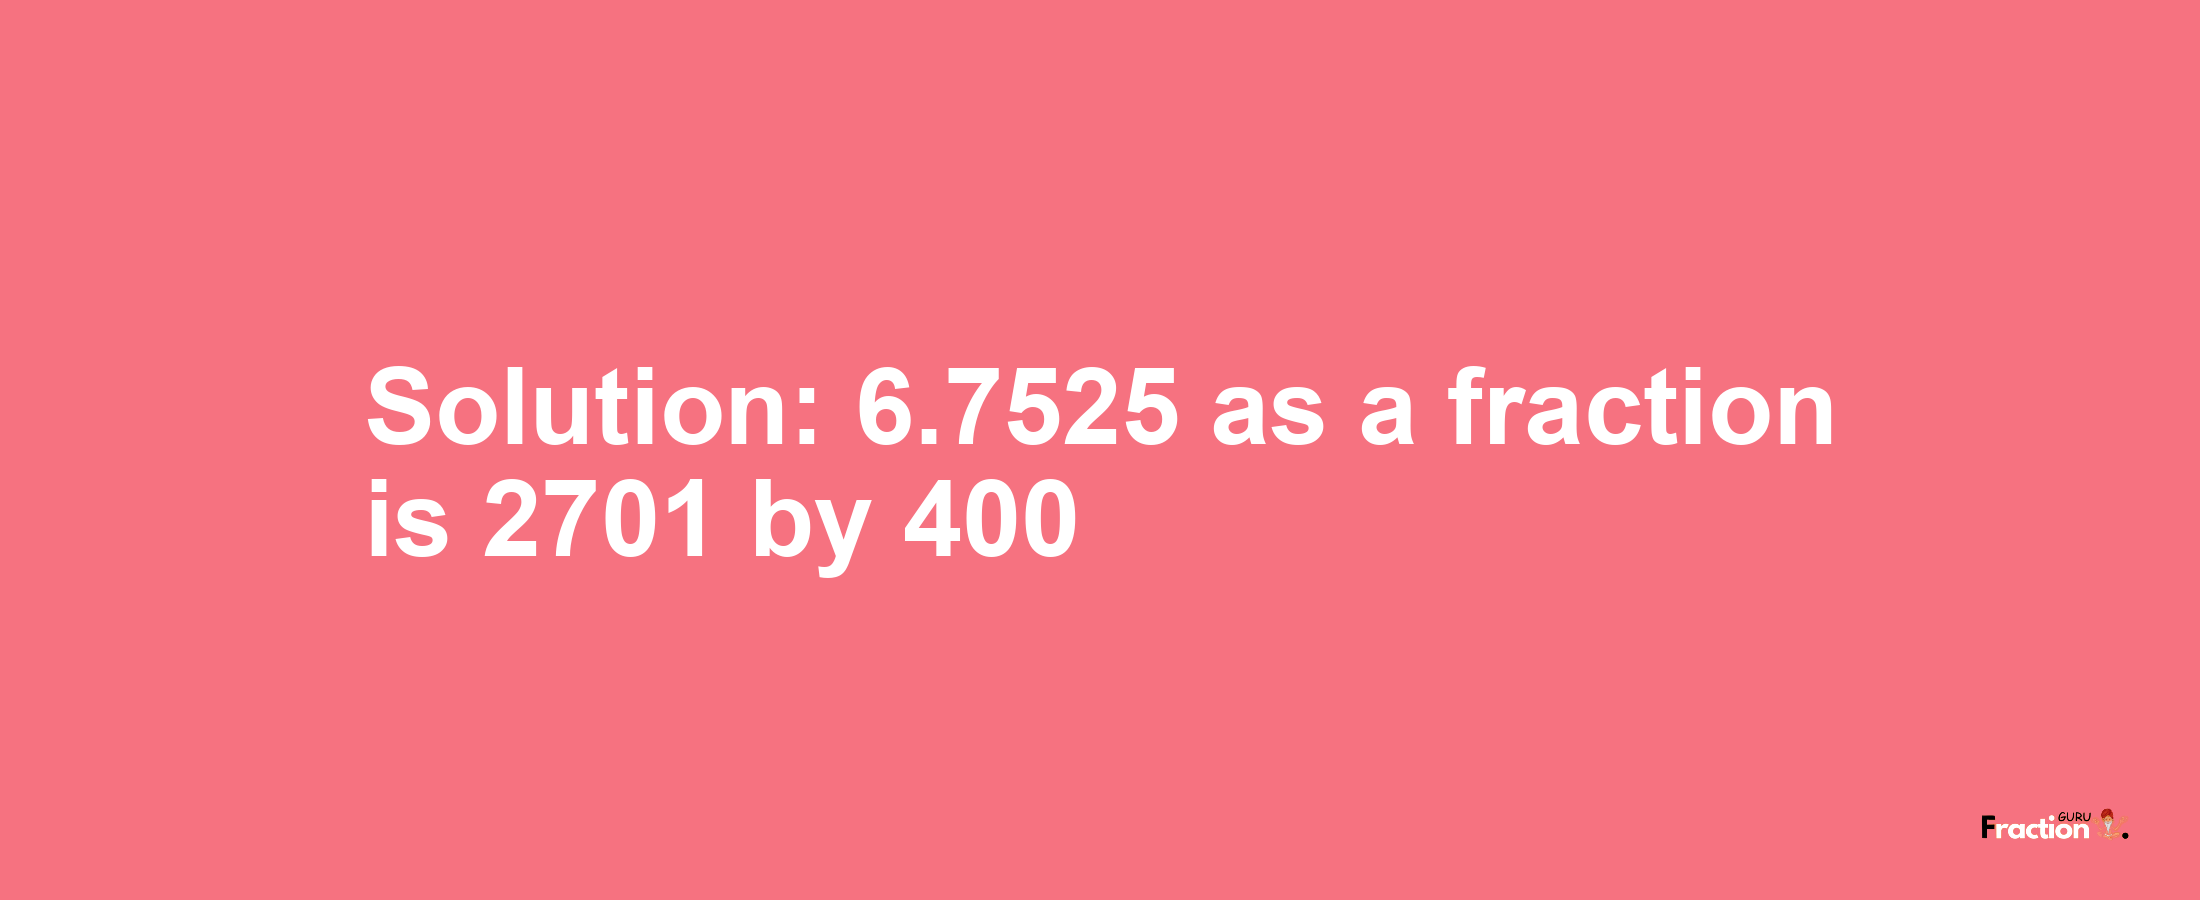 Solution:6.7525 as a fraction is 2701/400